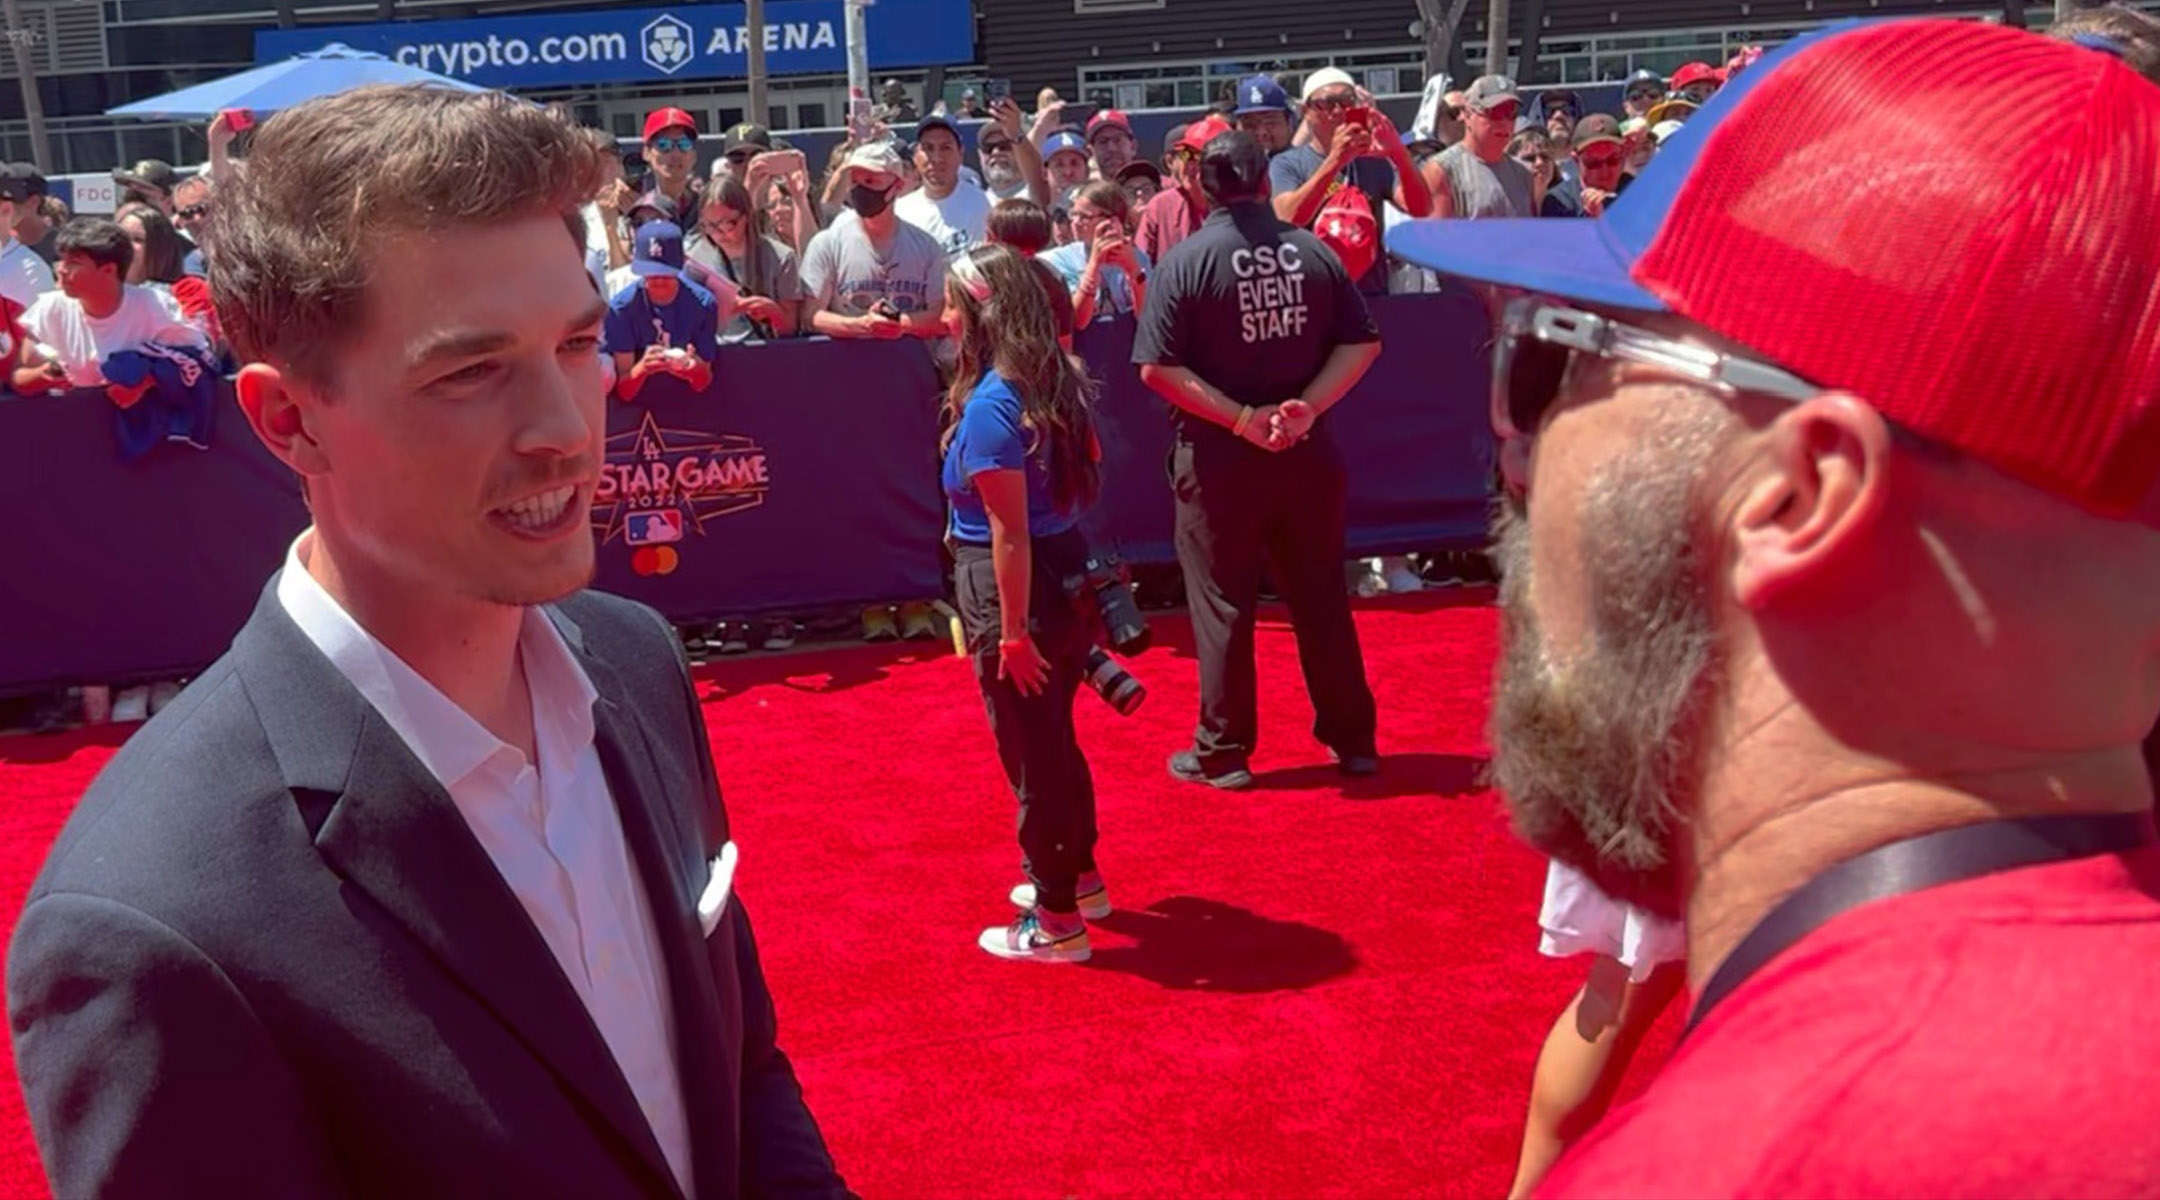 Rob Friedman, right, with Jewish pitcher Max Fried at the 2022 MLB All-Star Weekend red carpet event in Los Angeles. (Courtesy of Rob Friedman)